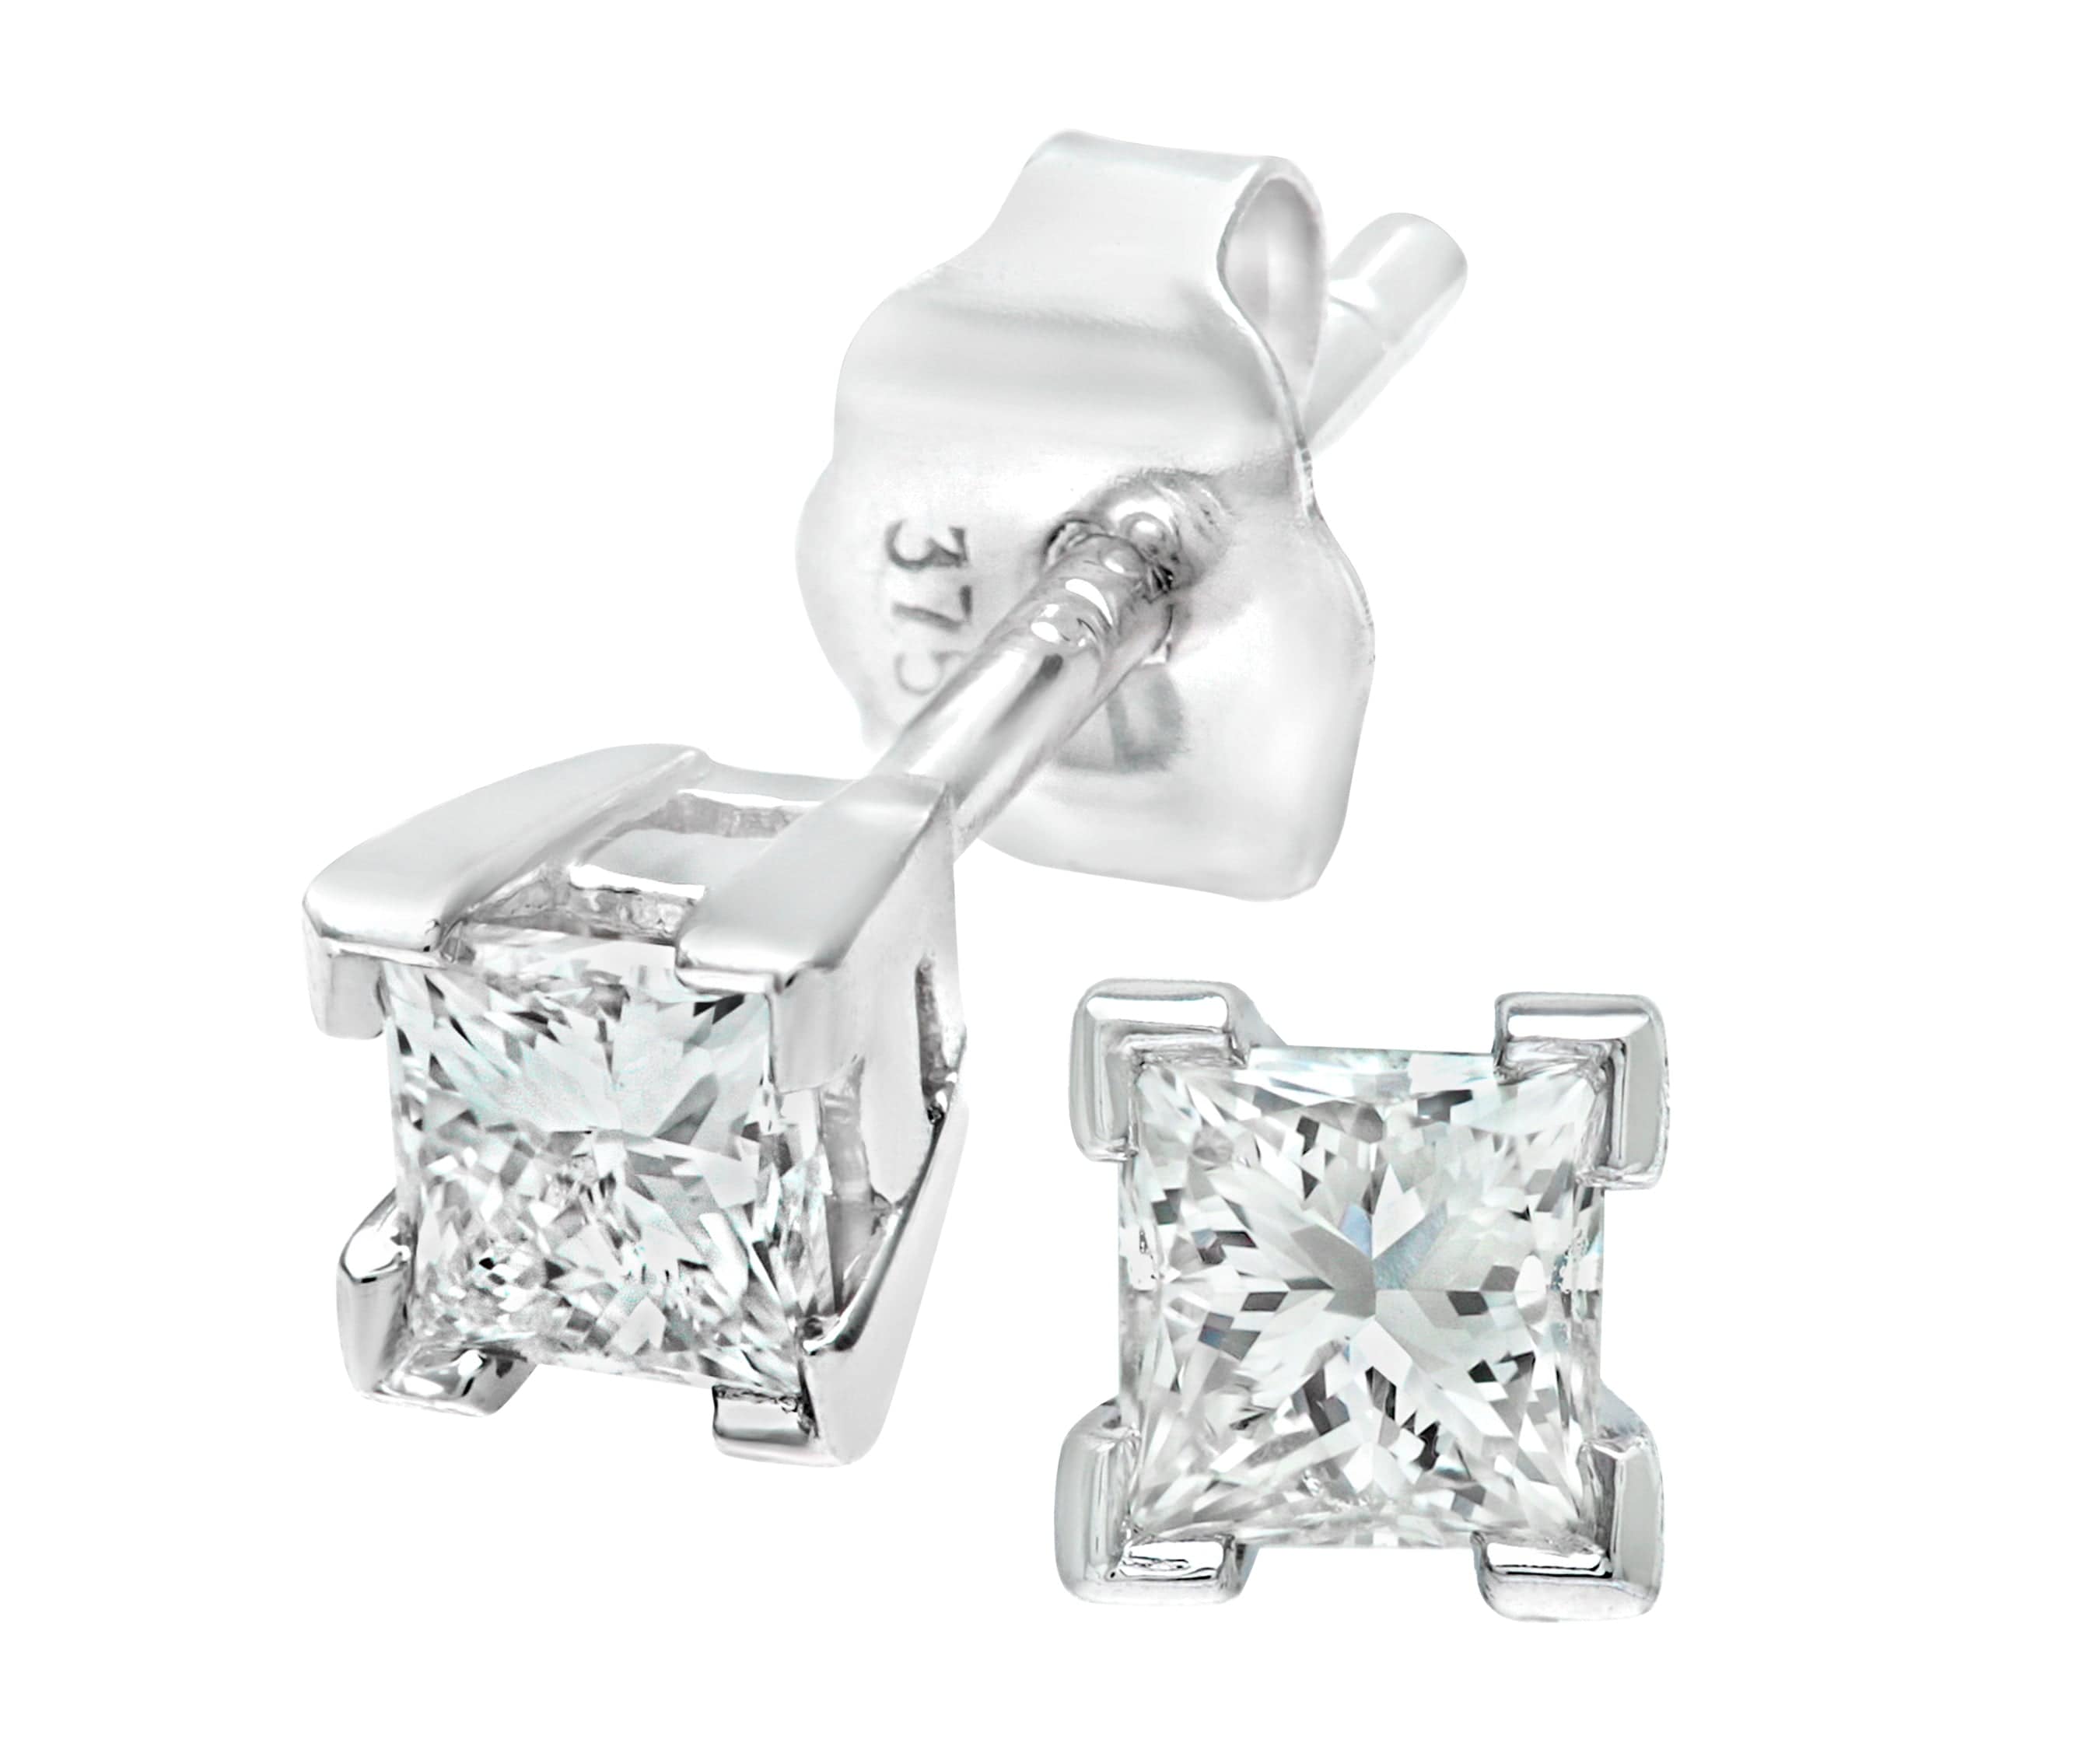 Lynora Luxe Earring White Gold 9ct / Diamond 9ct White Gold 0.25ct Diamond Solitare Earrings